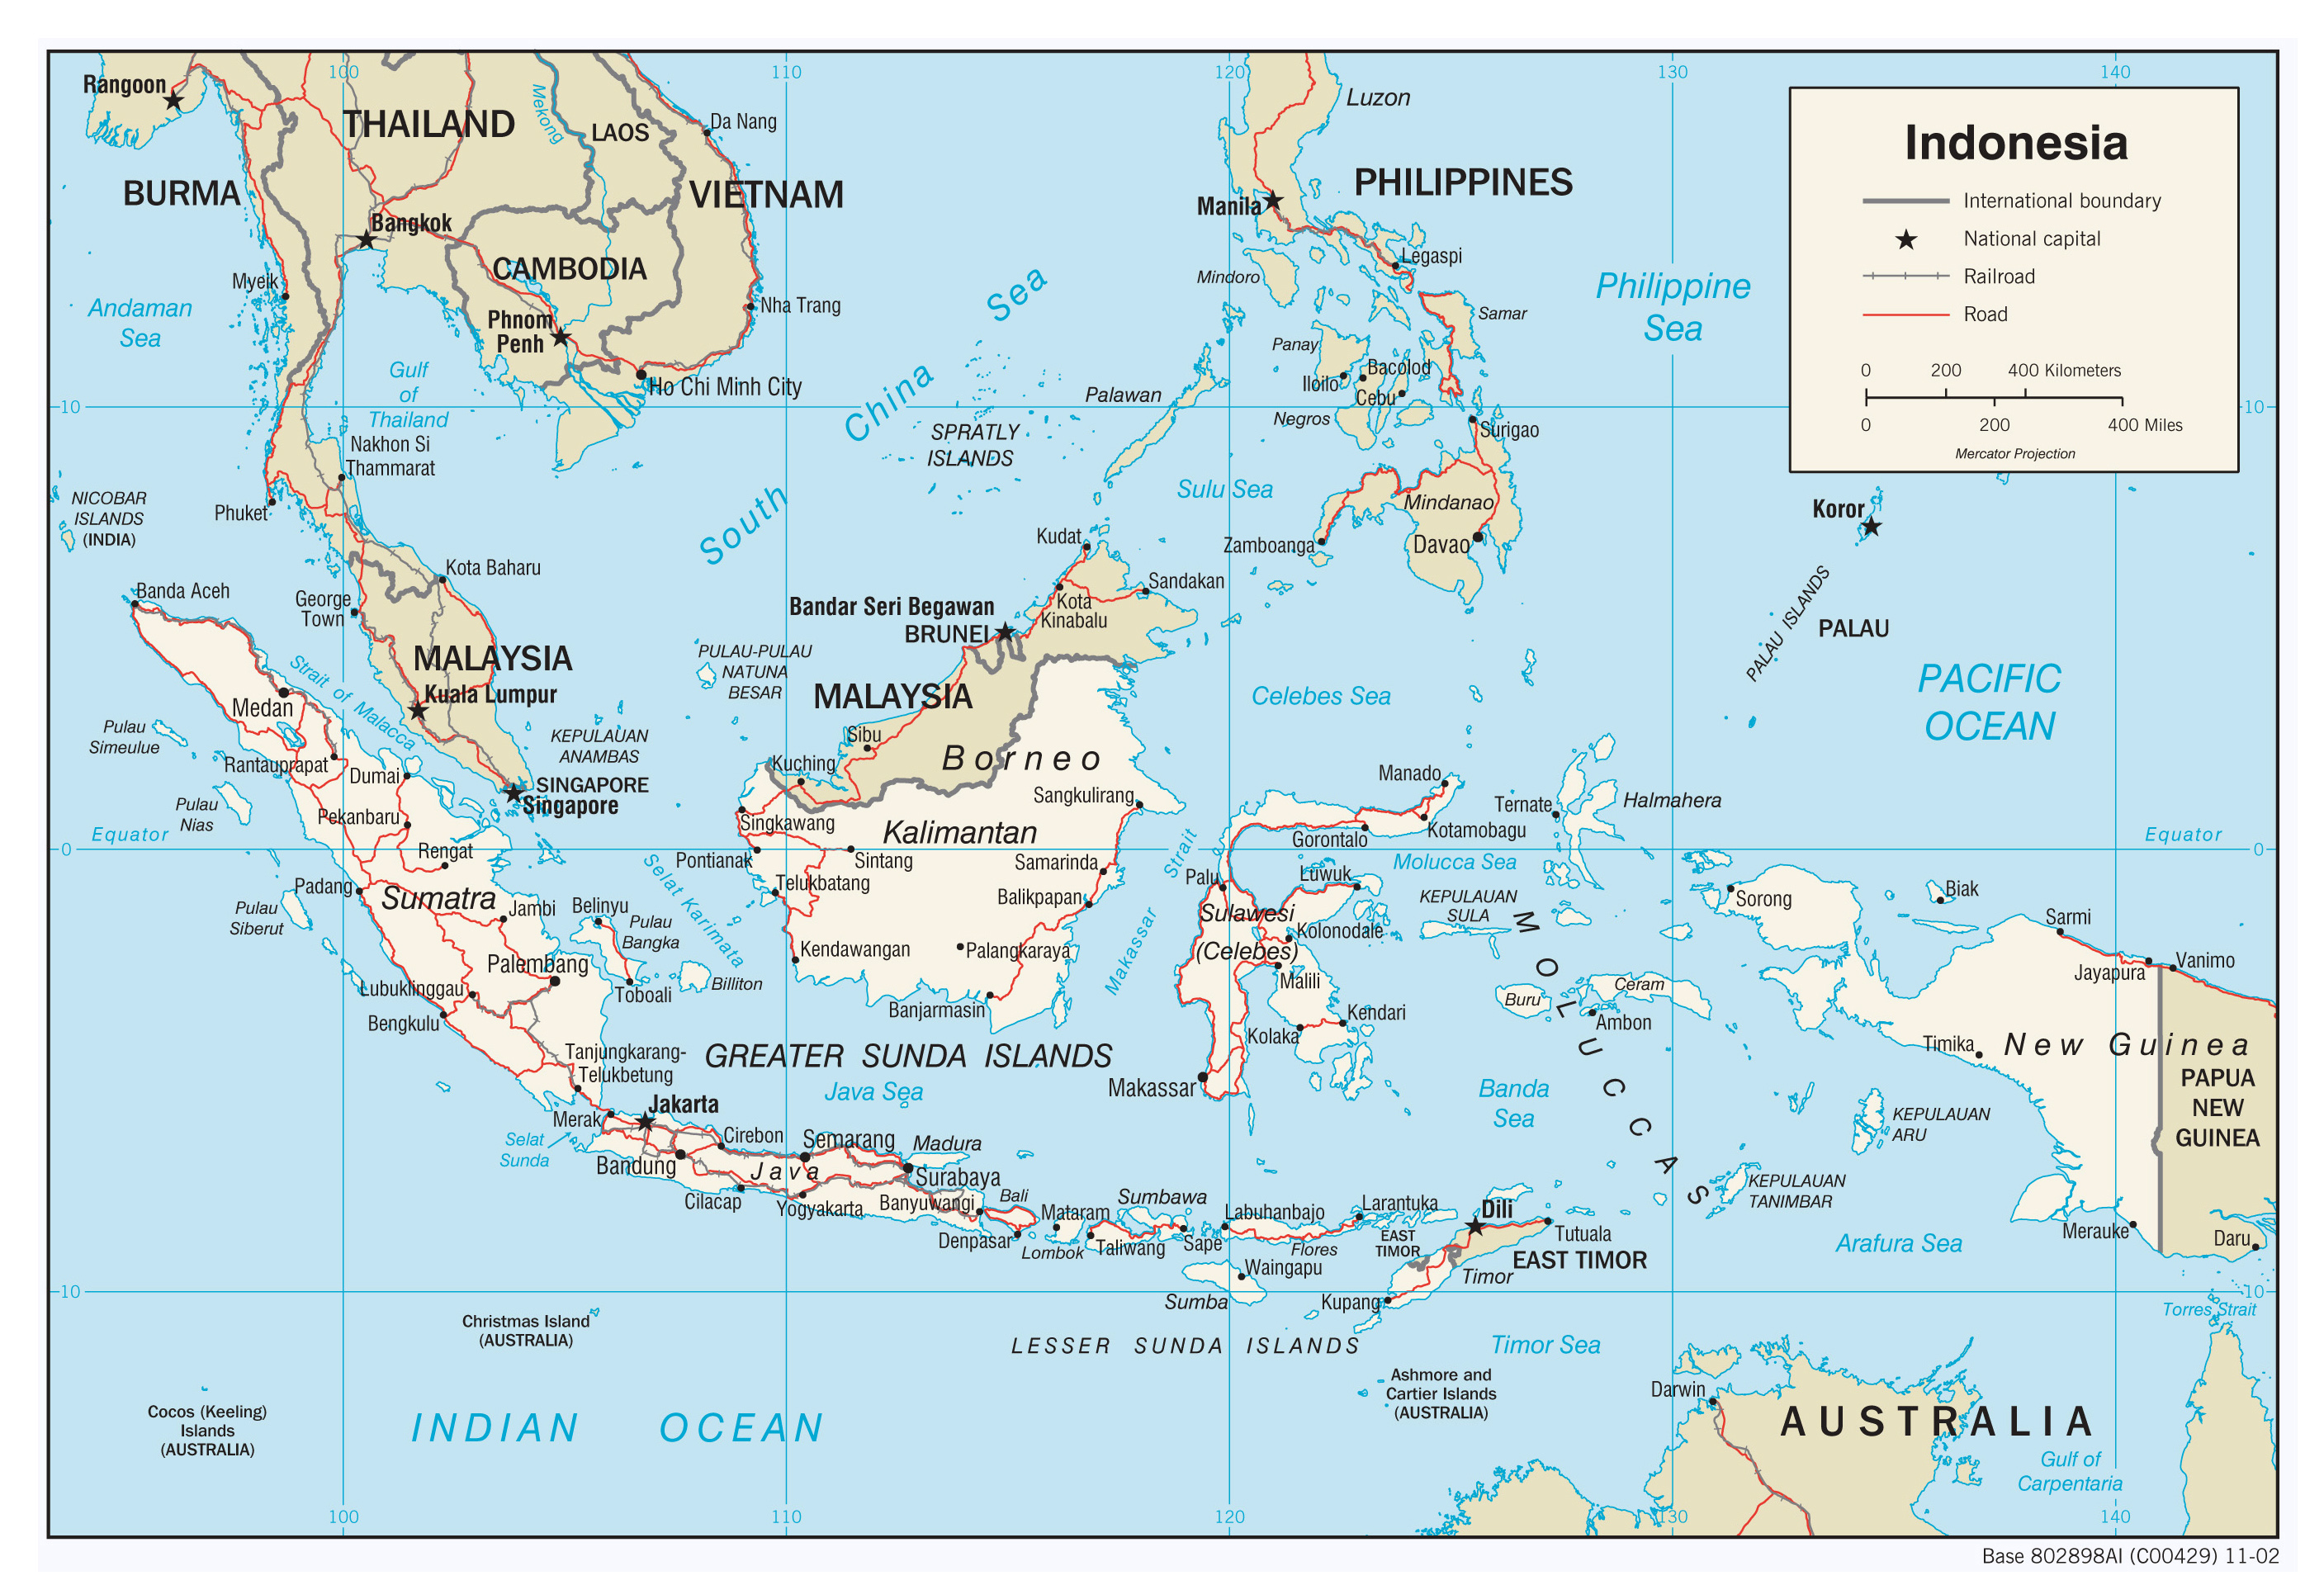 Large Map of Indonesia - Bing